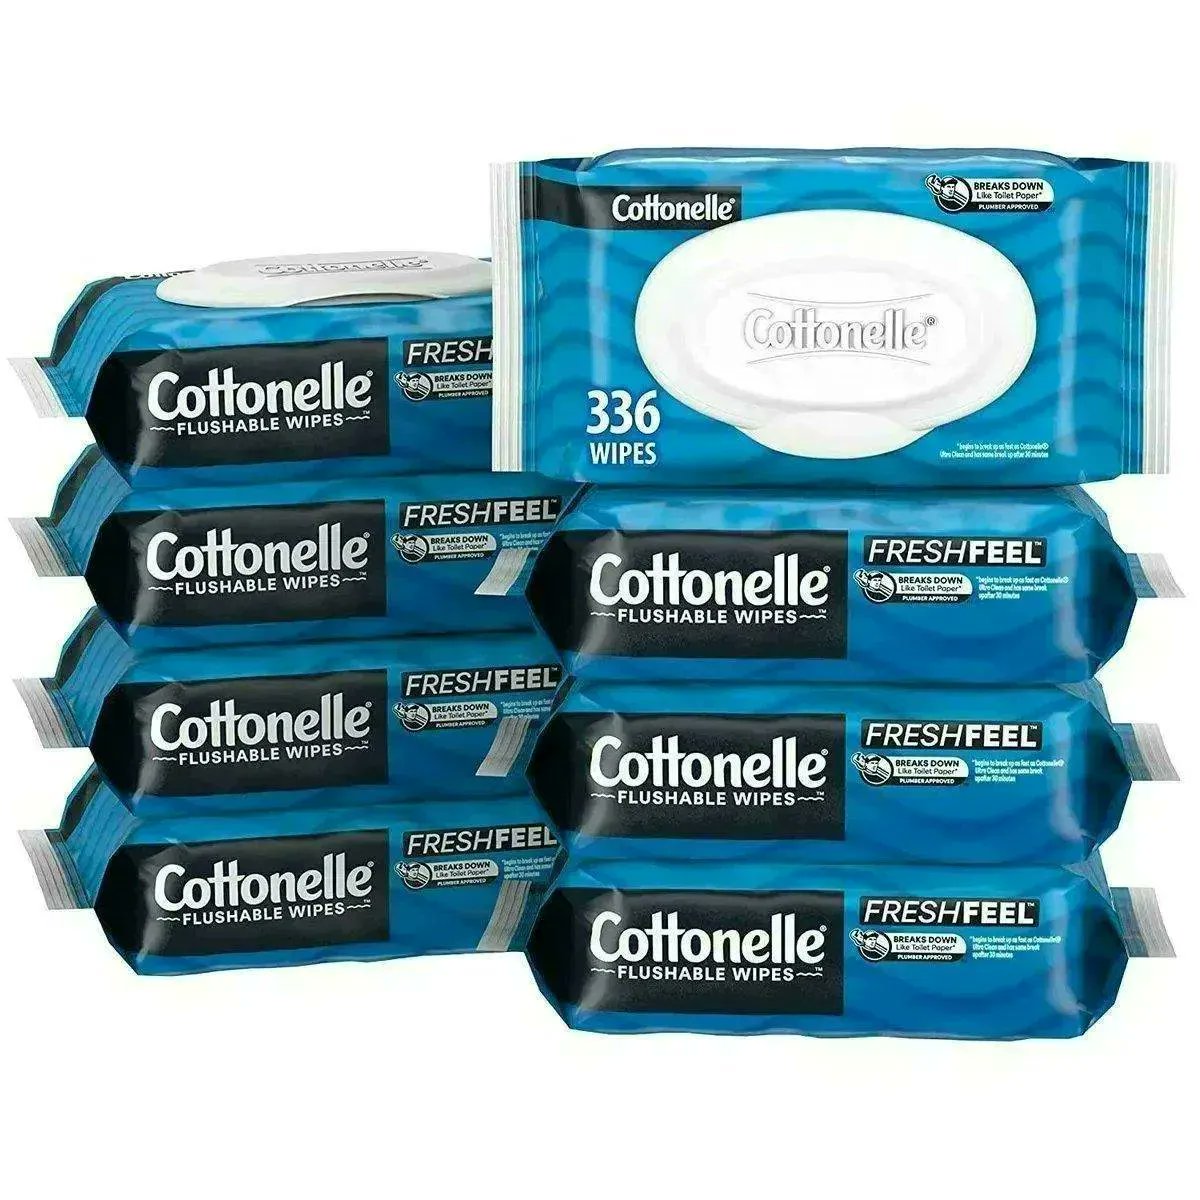 Get EIGHT Packs of Cottonelle Wet Wipes, as little as $11.89!
amazon.com/gp/product/B07…